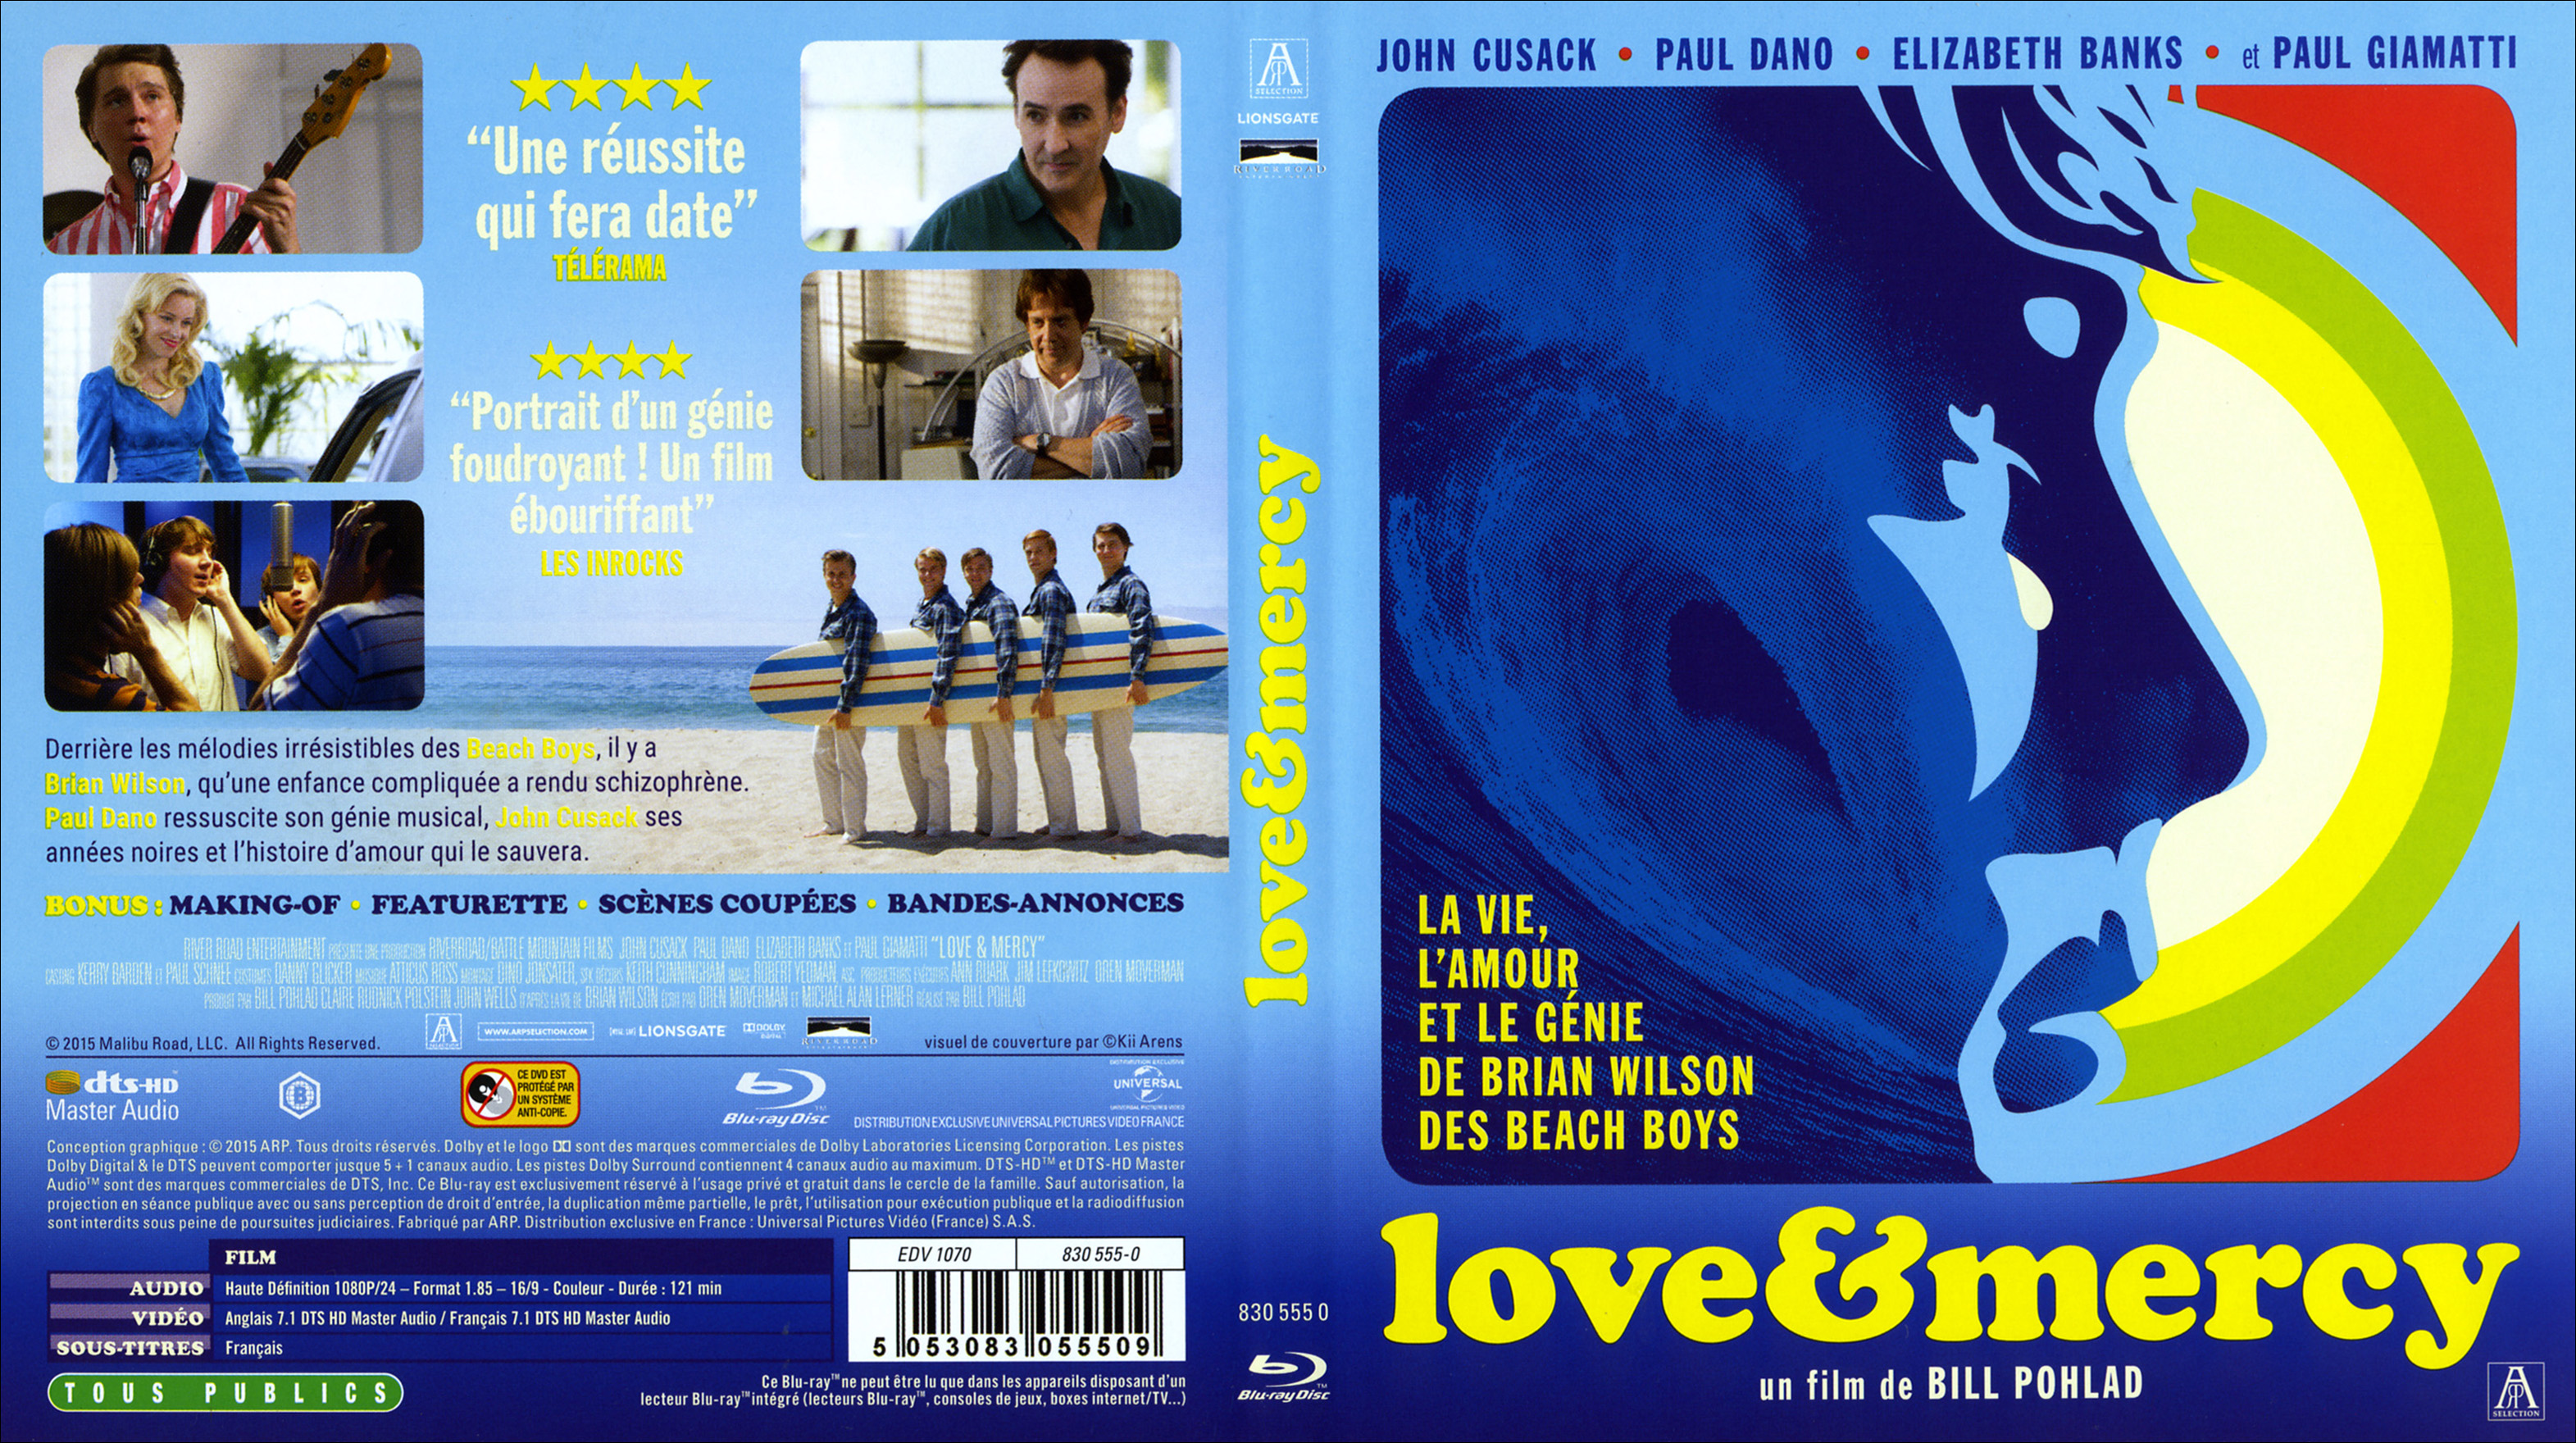 Jaquette DVD Love & mercy (BLU-RAY)